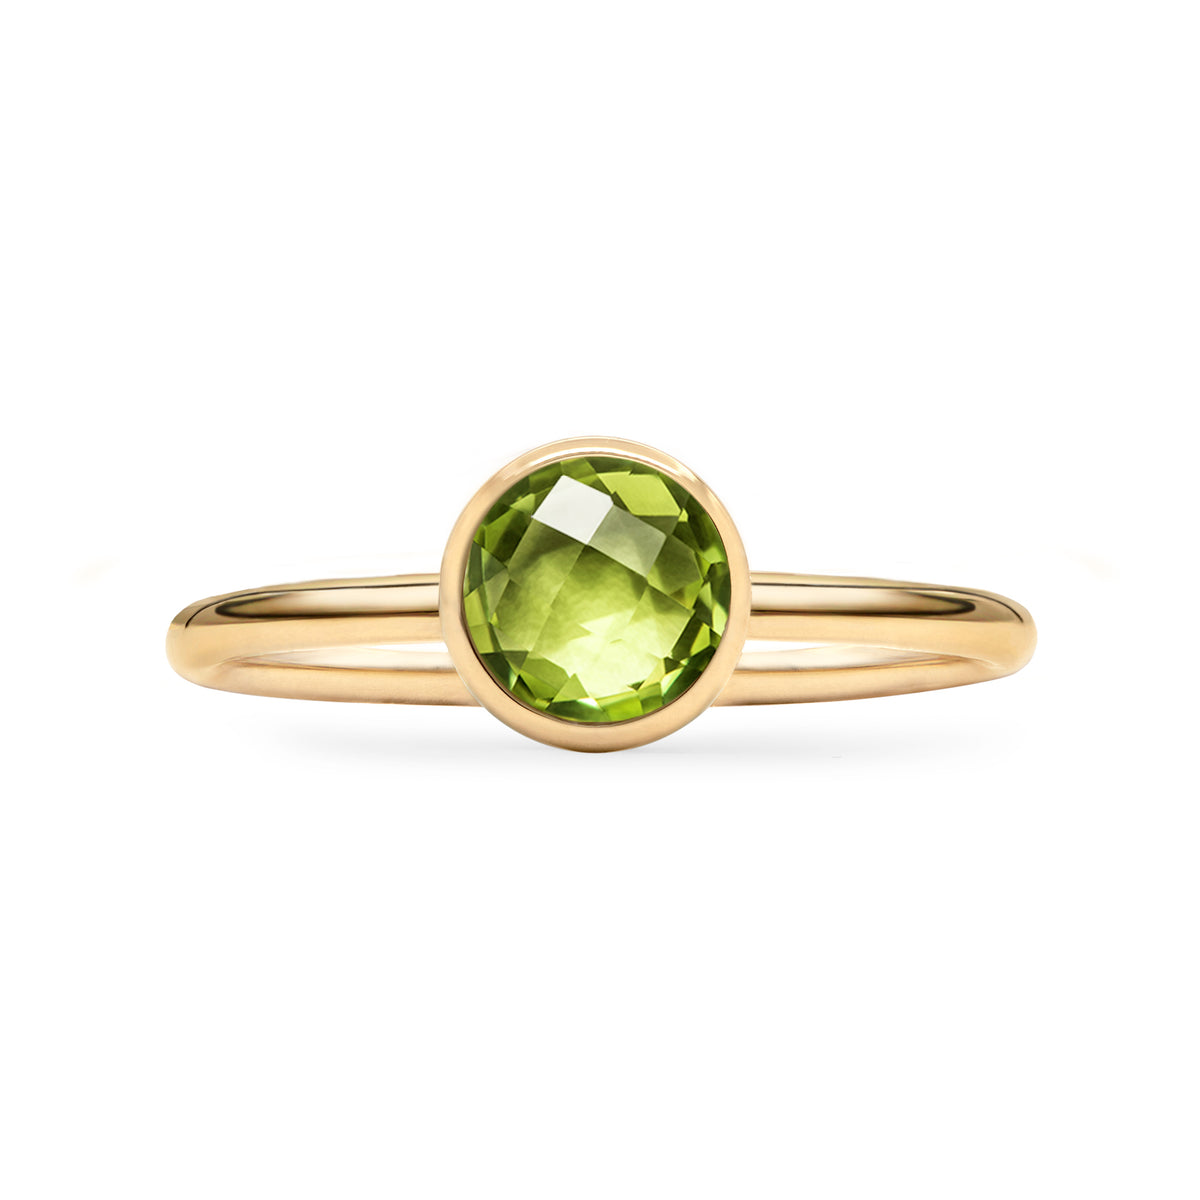 Peridot in Gold Ring (August) Grand 14k